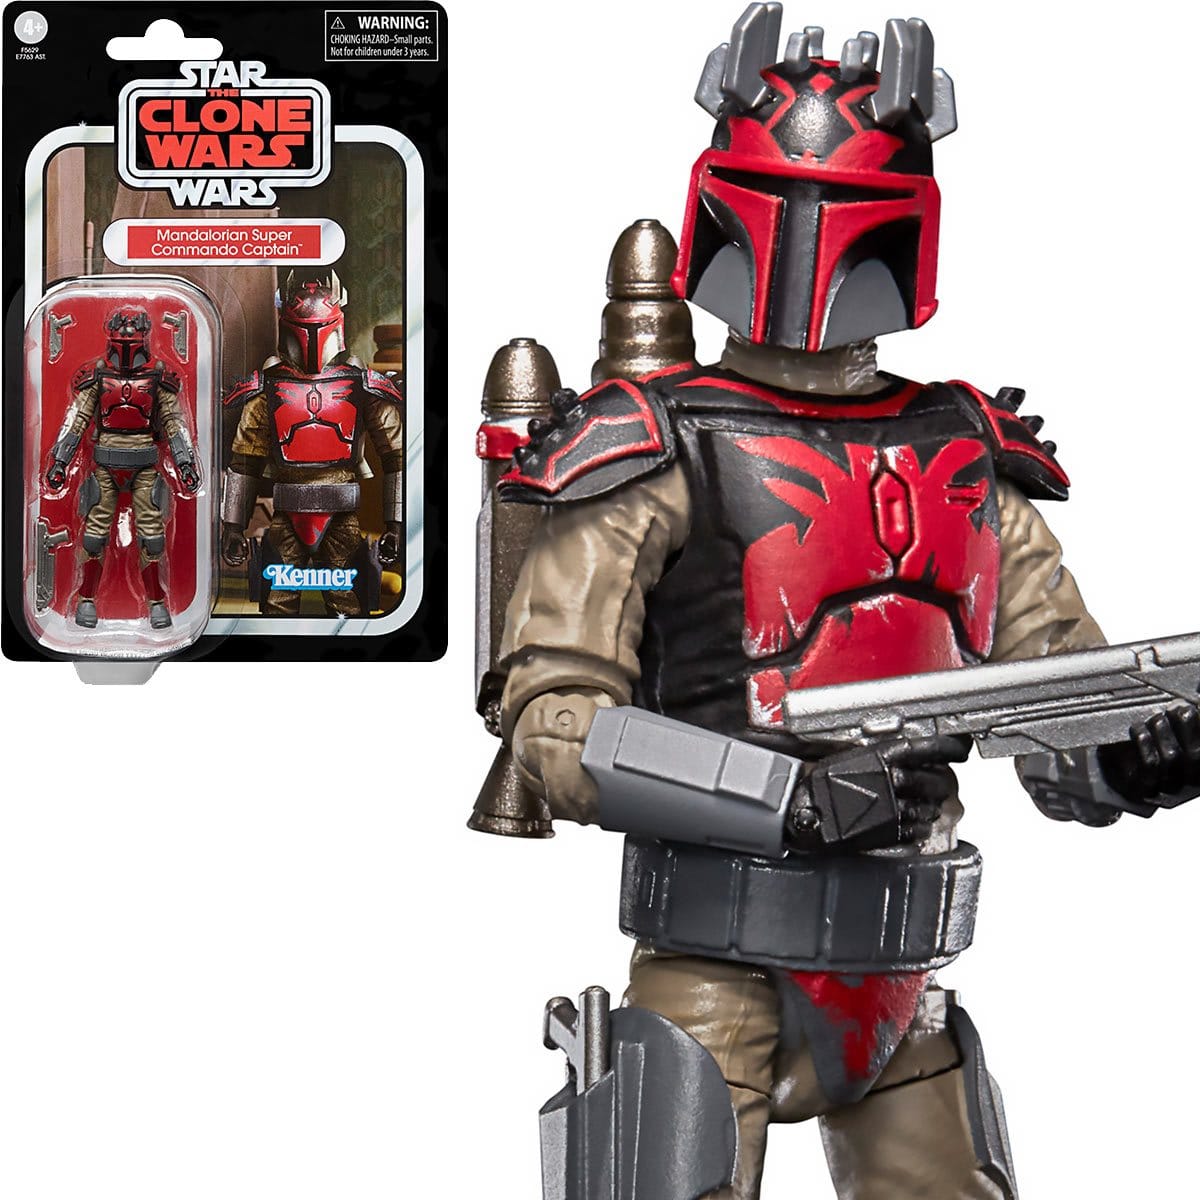 Star Wars The Vintage Collection Mandalorian Super Commando Captain 3 3/4-Inch Action Figure With Box